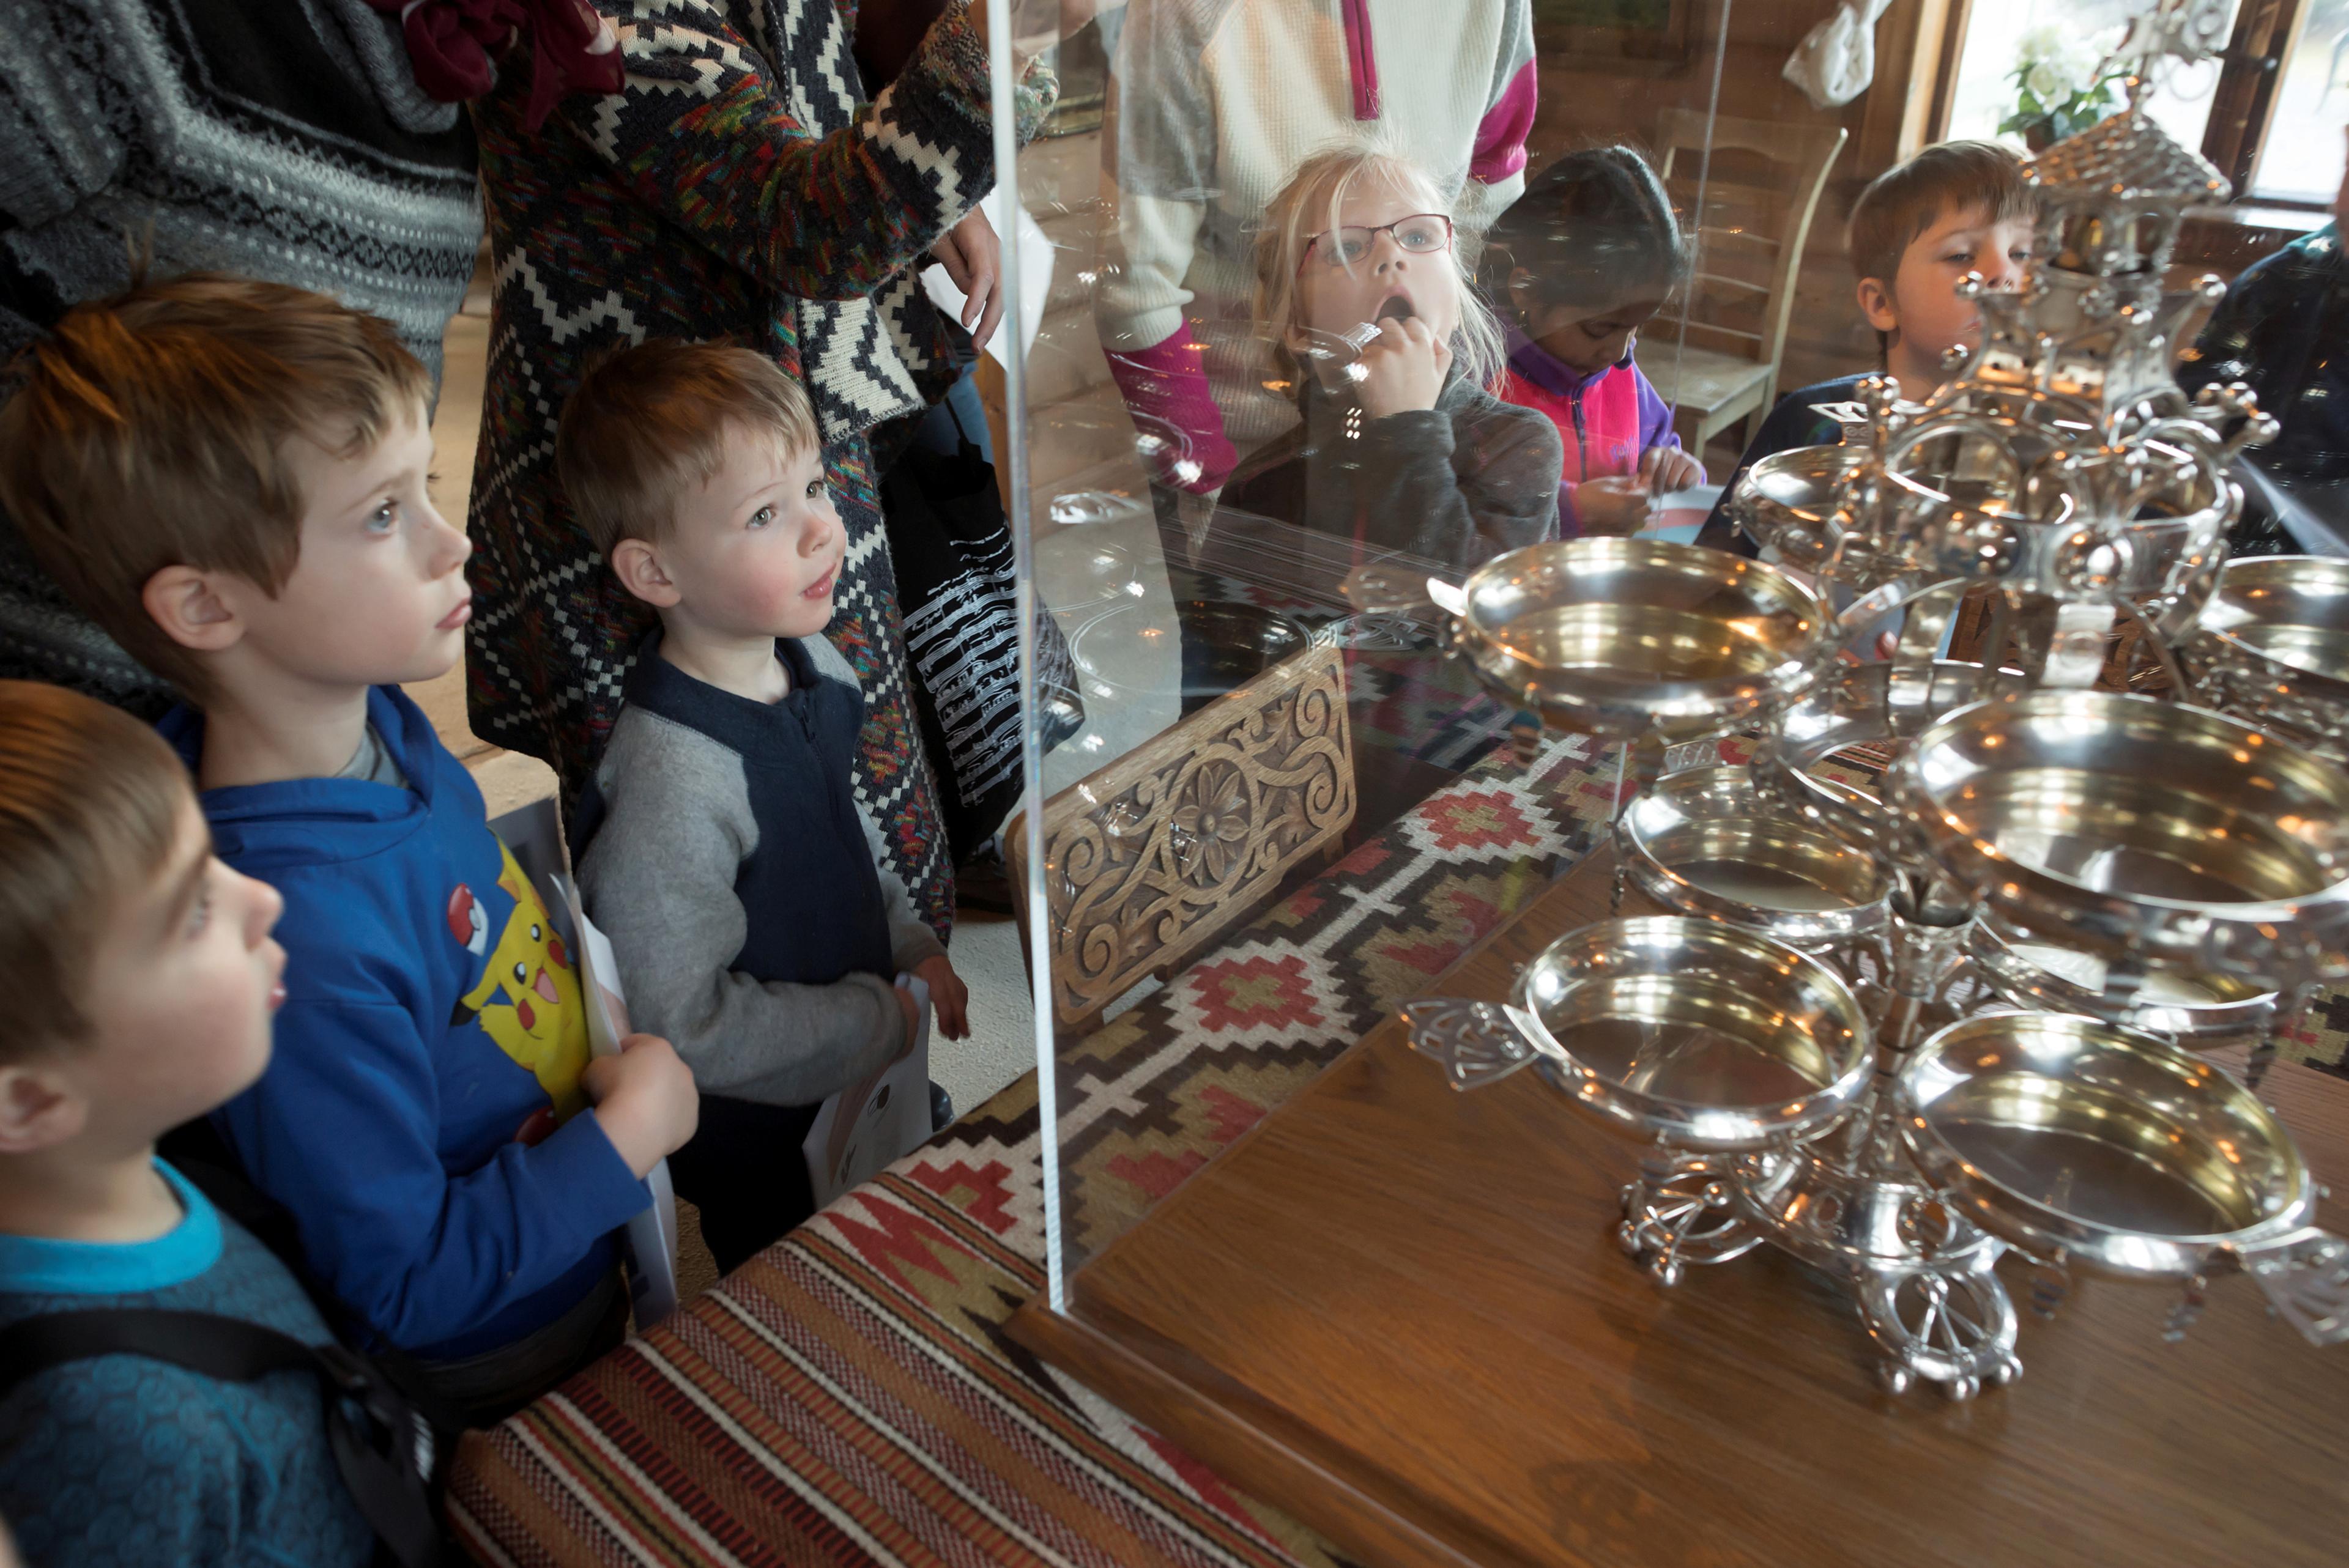 A group of children in the Grieg villa at Troldhaugen, looking at a silver installation